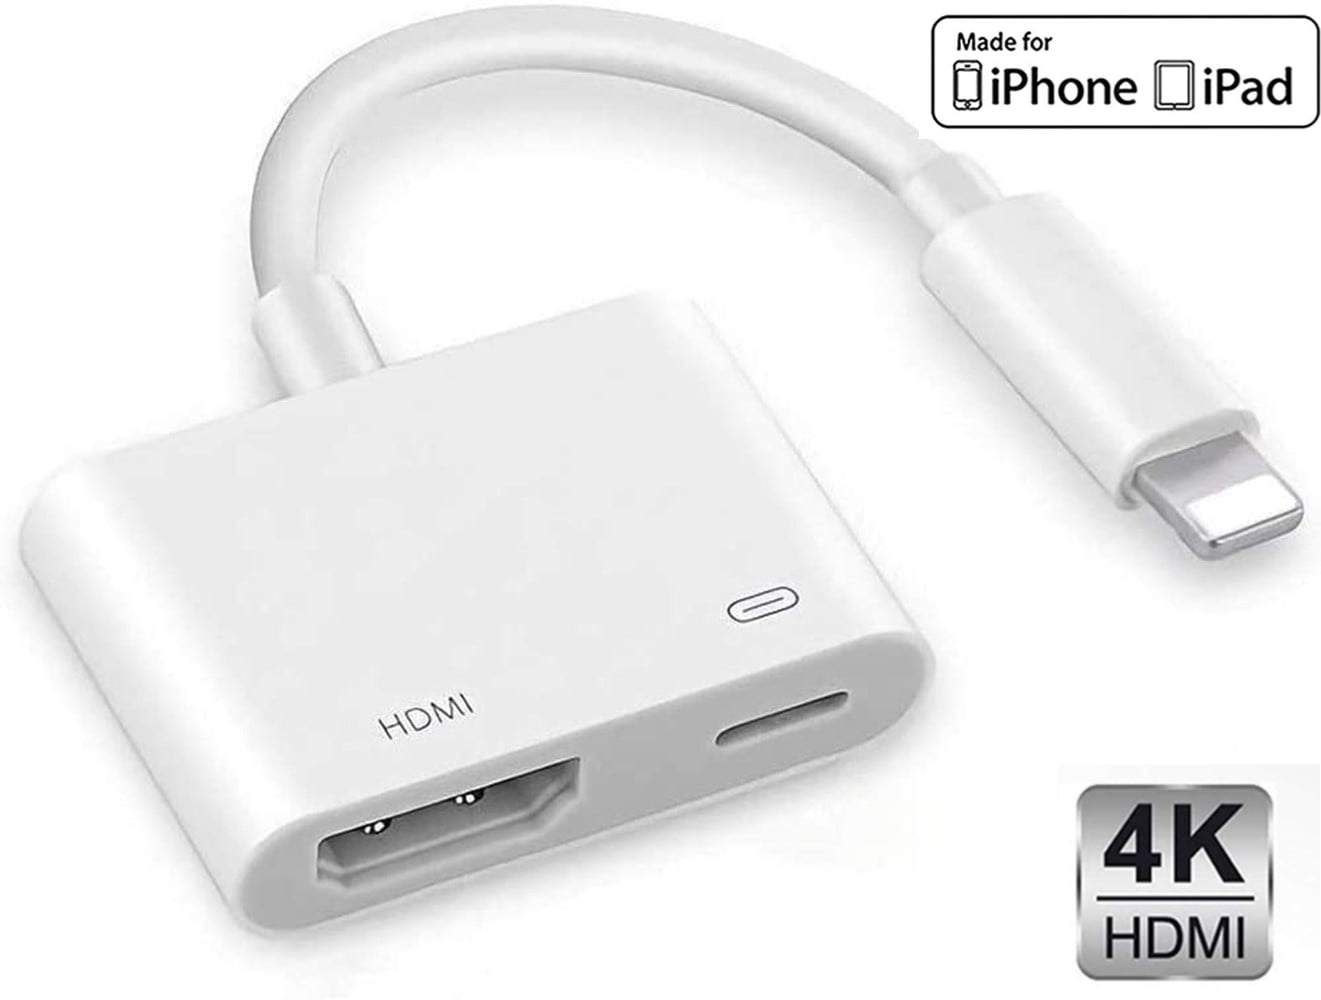 blæse hul Meget udvide Lightning to HDMI Digital AV Adapter,[Apple MFi Certified] 1080P HDMI Sync  Screen Digital Audio AV Converter with Charging Port for iPhone, iPad, iPod  on HDTV/Projector/Monitor, Support All iOS - Walmart.com